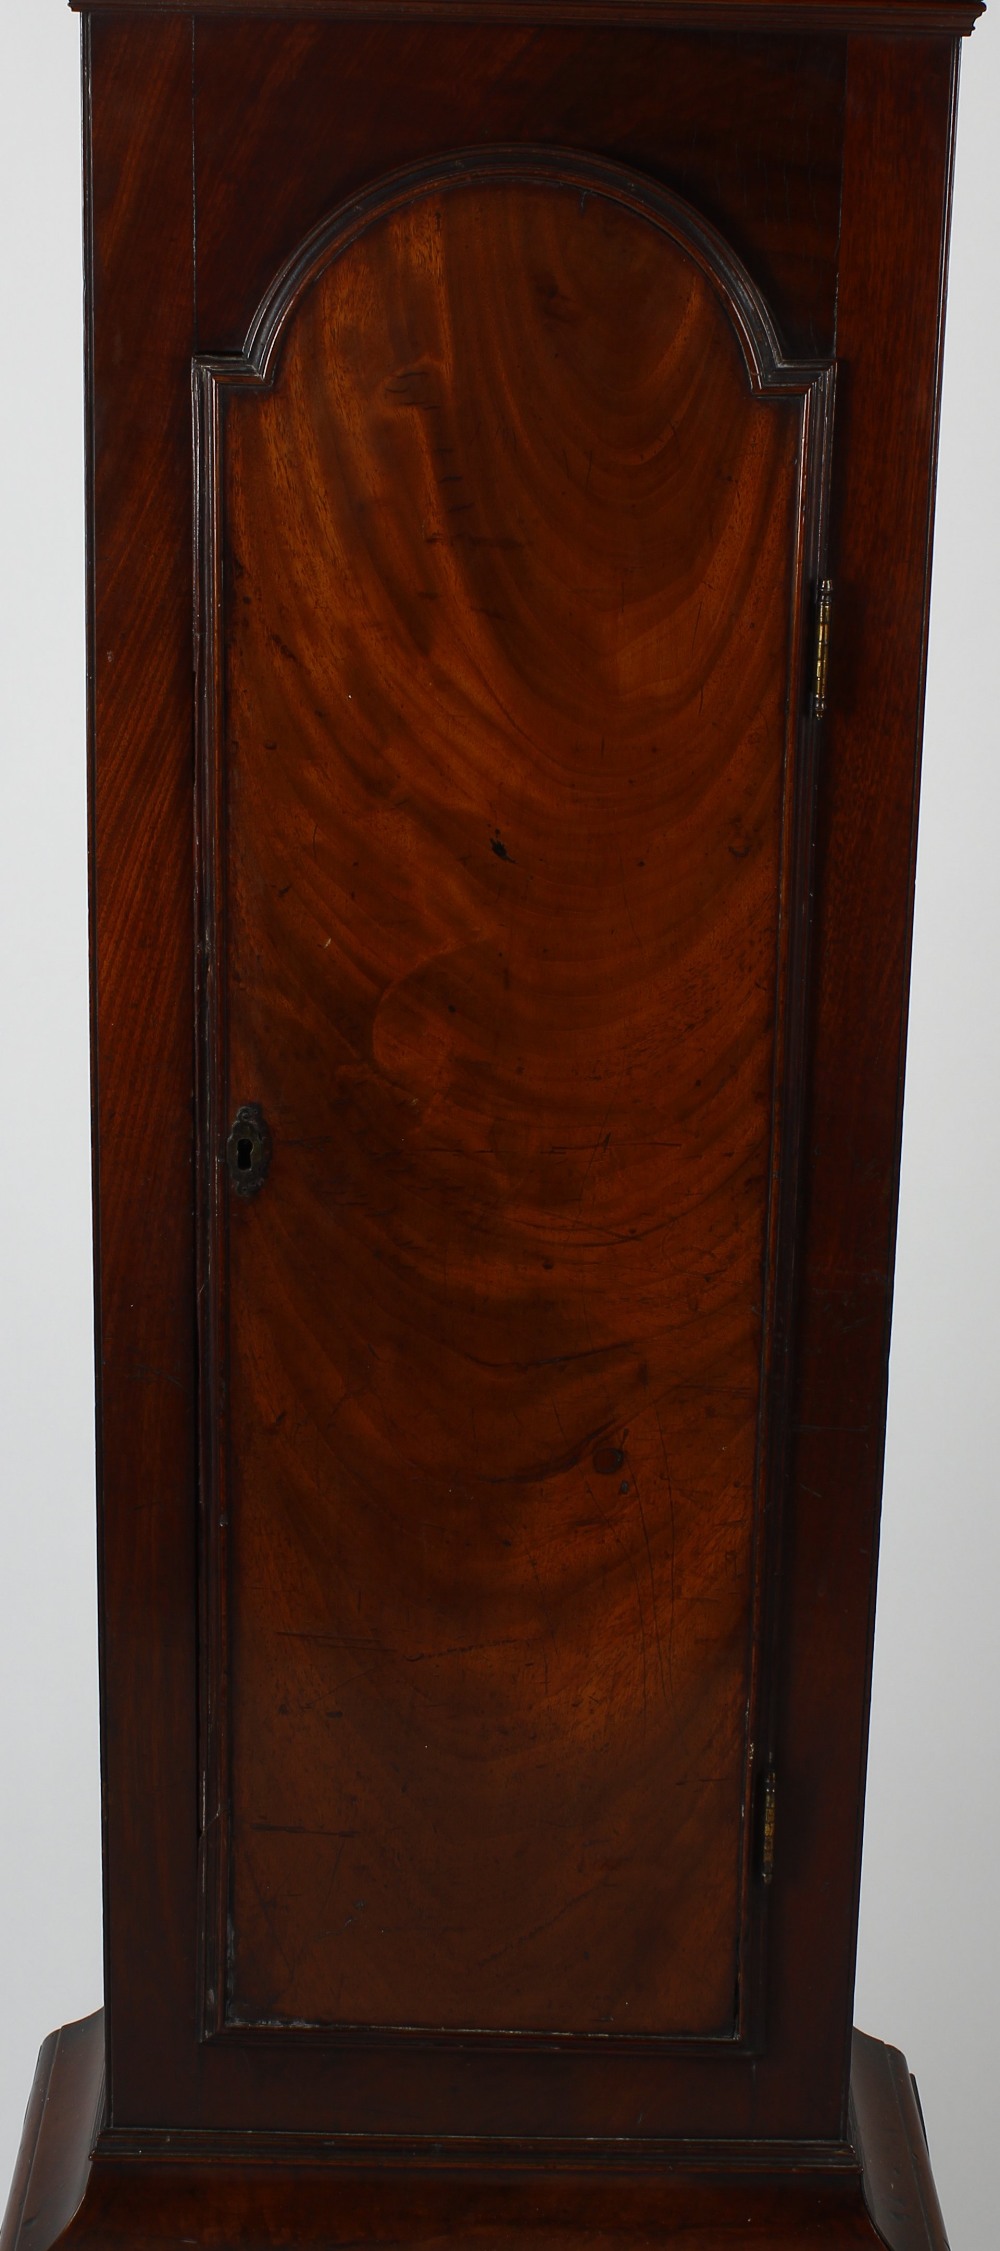 An early 19th century mahogany-cased 8-day painted dial longcase clock. Anonymous, circa 1830 The - Image 2 of 5